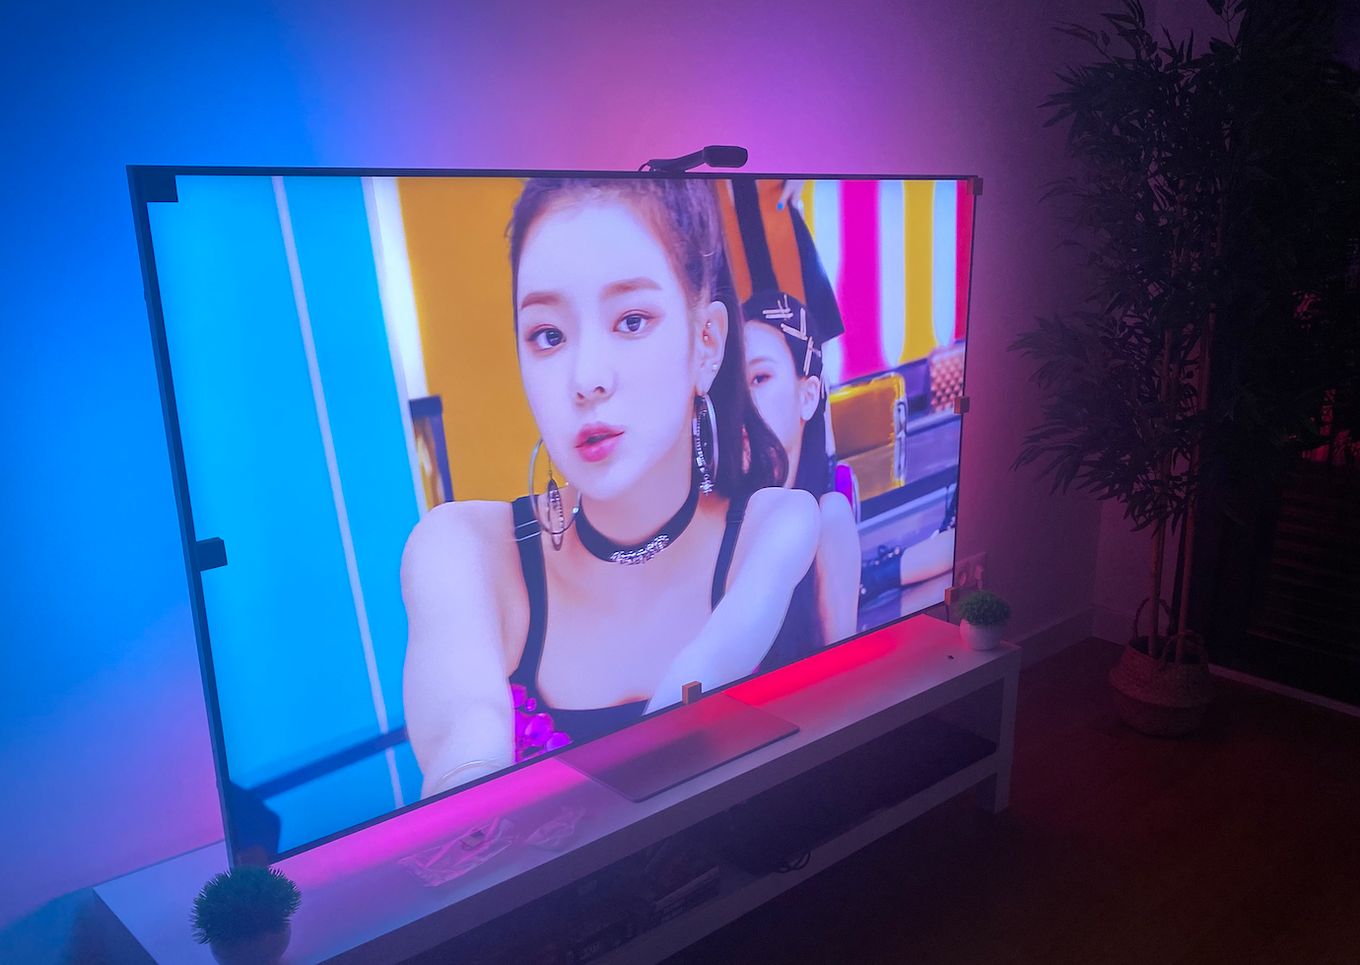 The Govee TV Backlight T2 is a serious upgrade to my TV